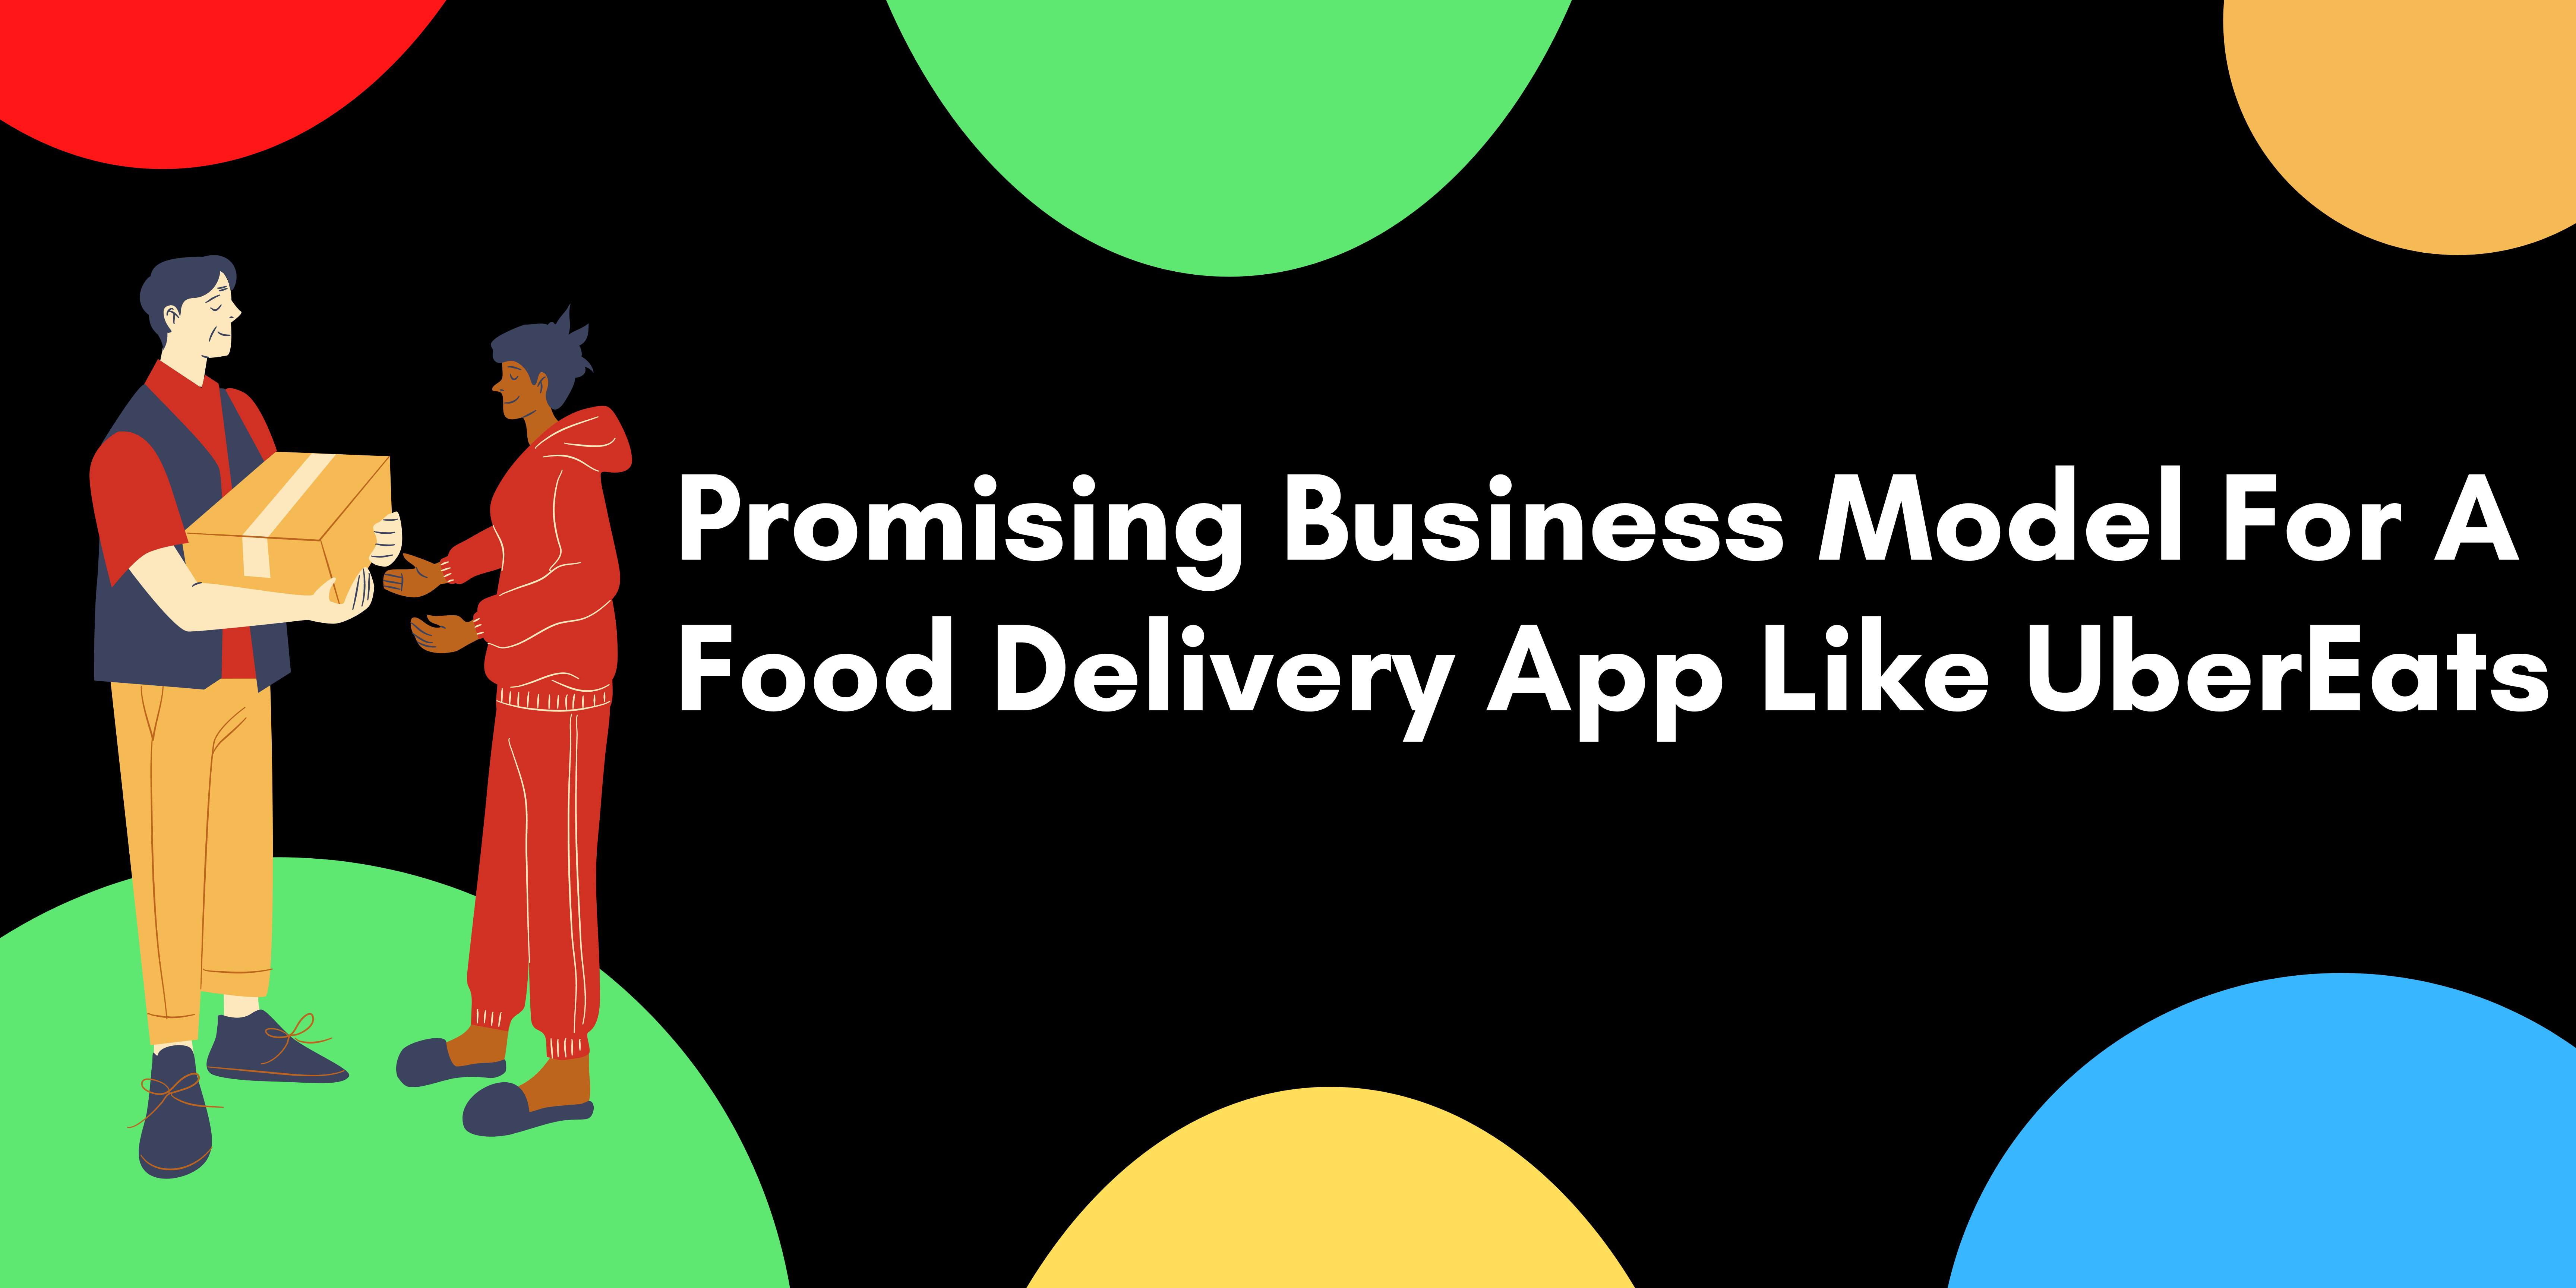 Promising Business Model For A Food Delivery App Like UberEats